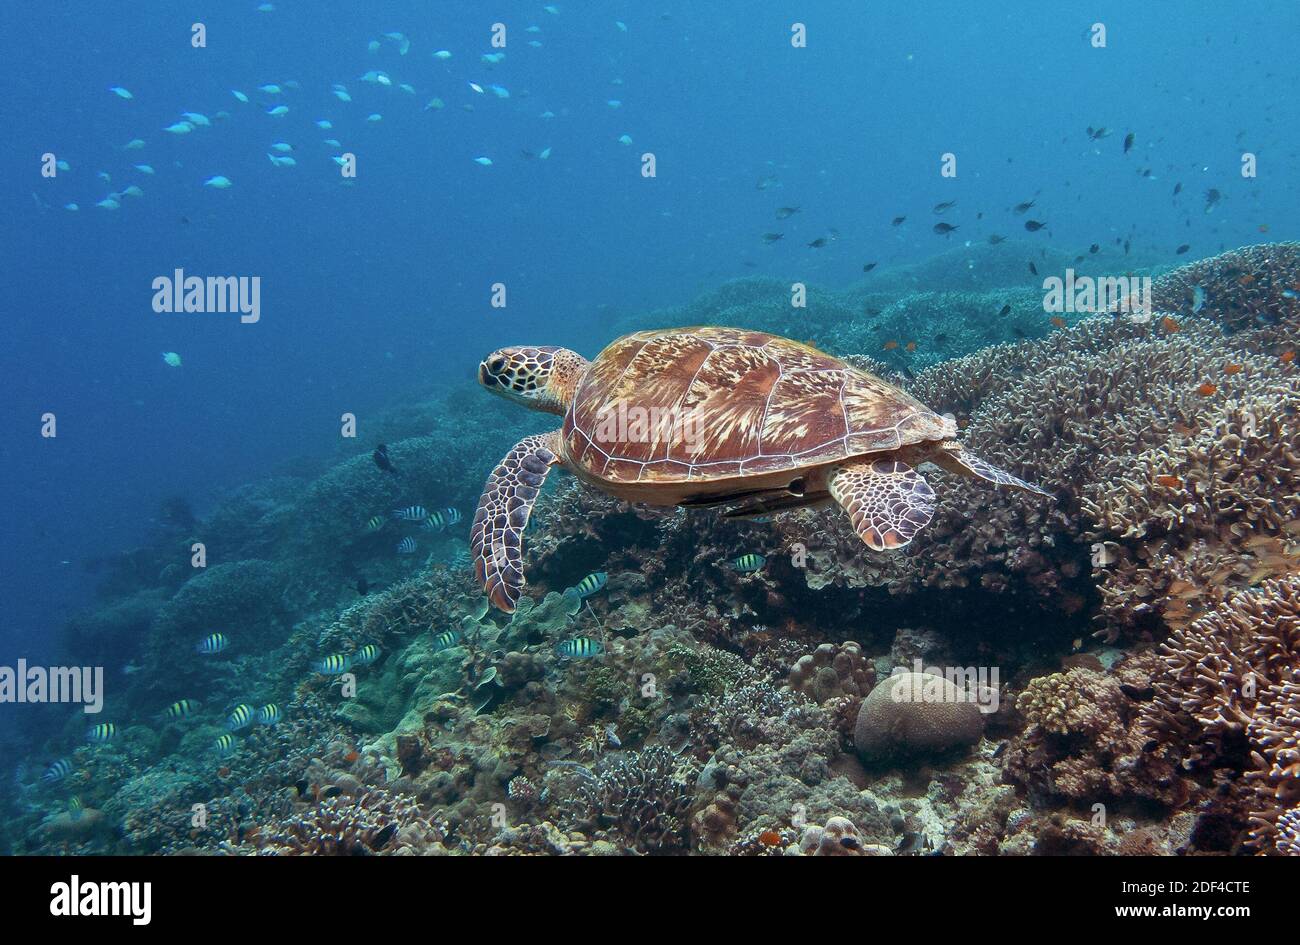 Green sea turtle (Chelonia mydas) off Siquijor Island in the Philippines in February 2020. Photo by Christophe Geyres/ABACAPRESS.COM Stock Photo